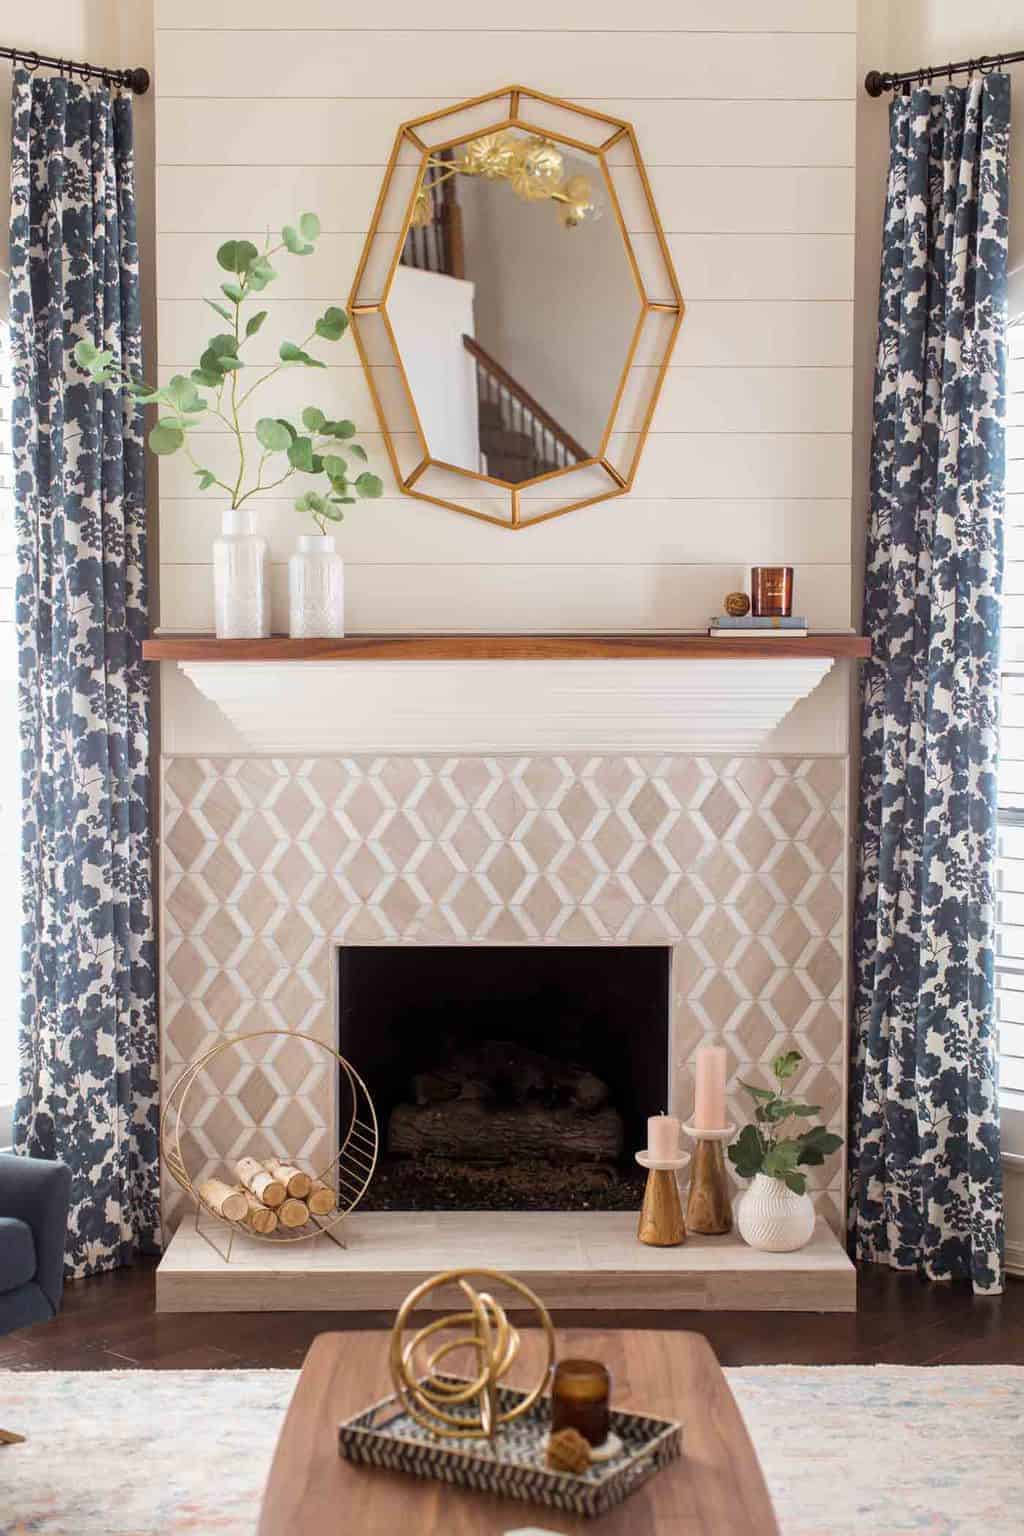 photo of the renovated fireplace and mantle in the living room by top Houston lifestyle blogger Ashley Rose of Sugar & Cloth